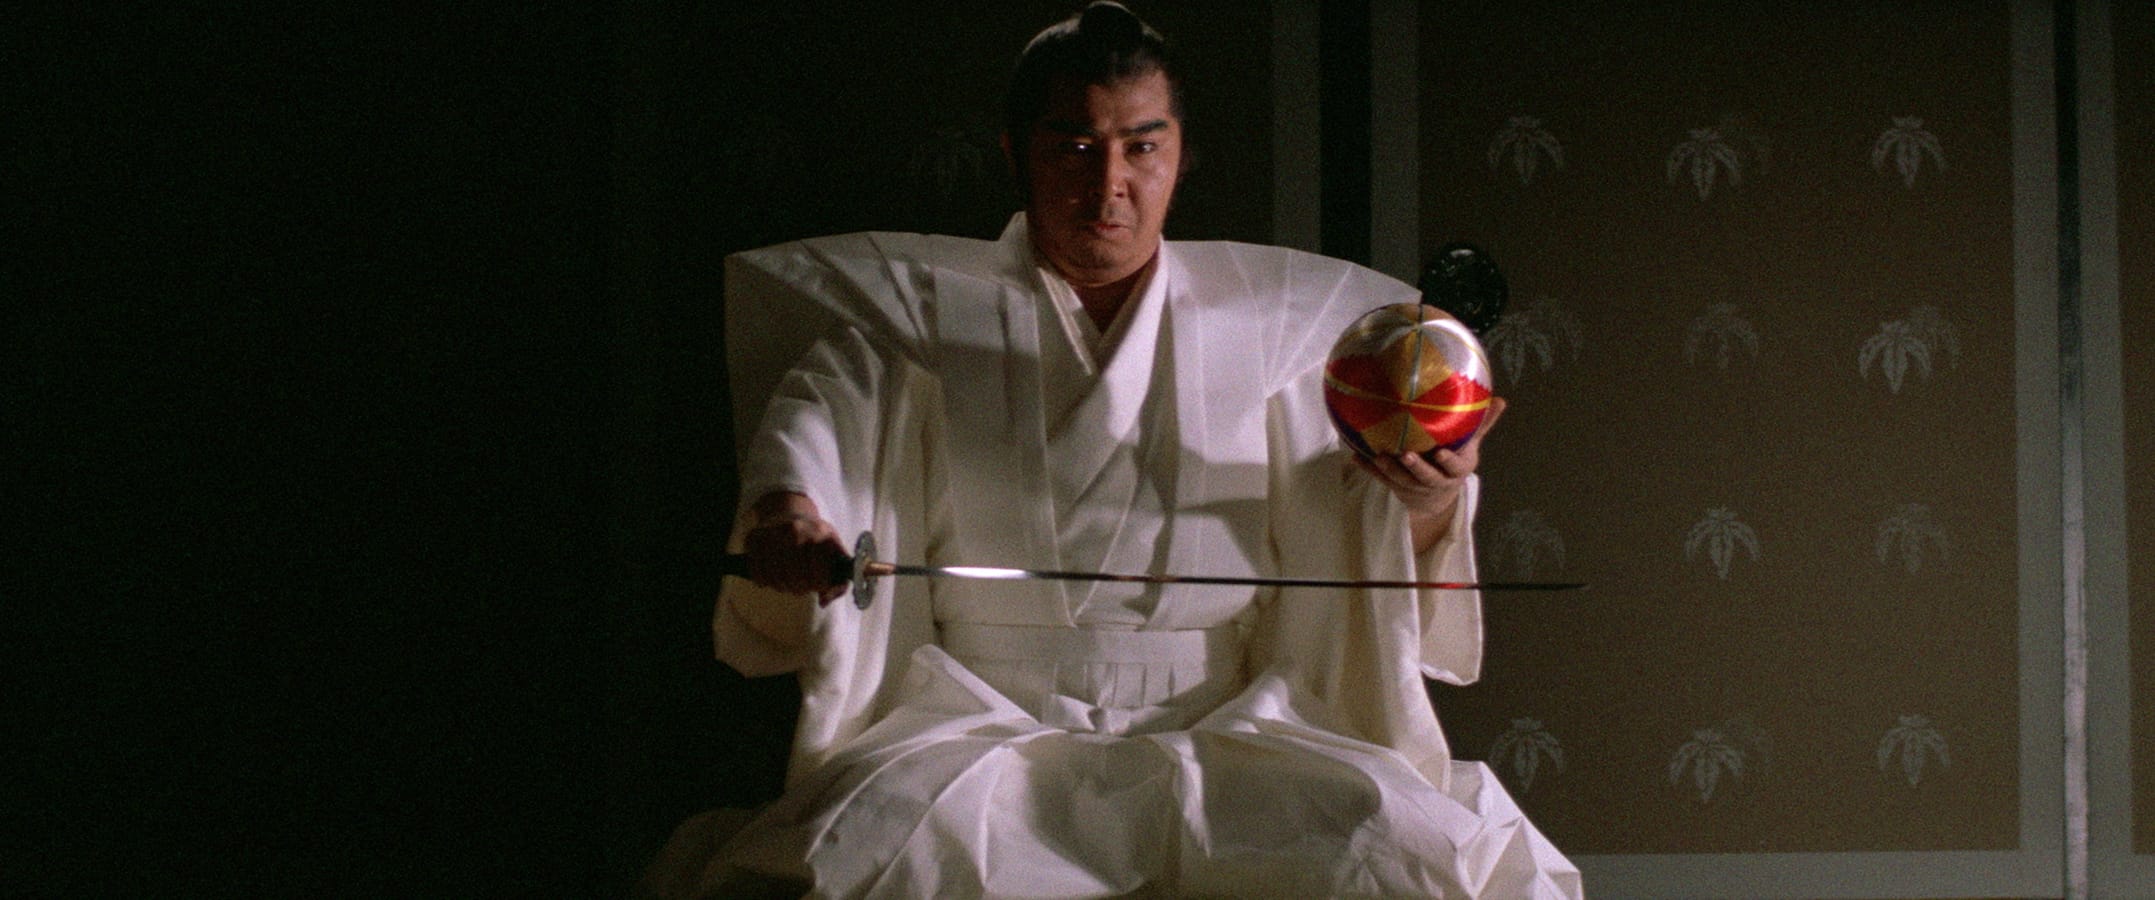 Still from LONE WOLF AND CUB: SWORD OF VENGEANCE (1972)